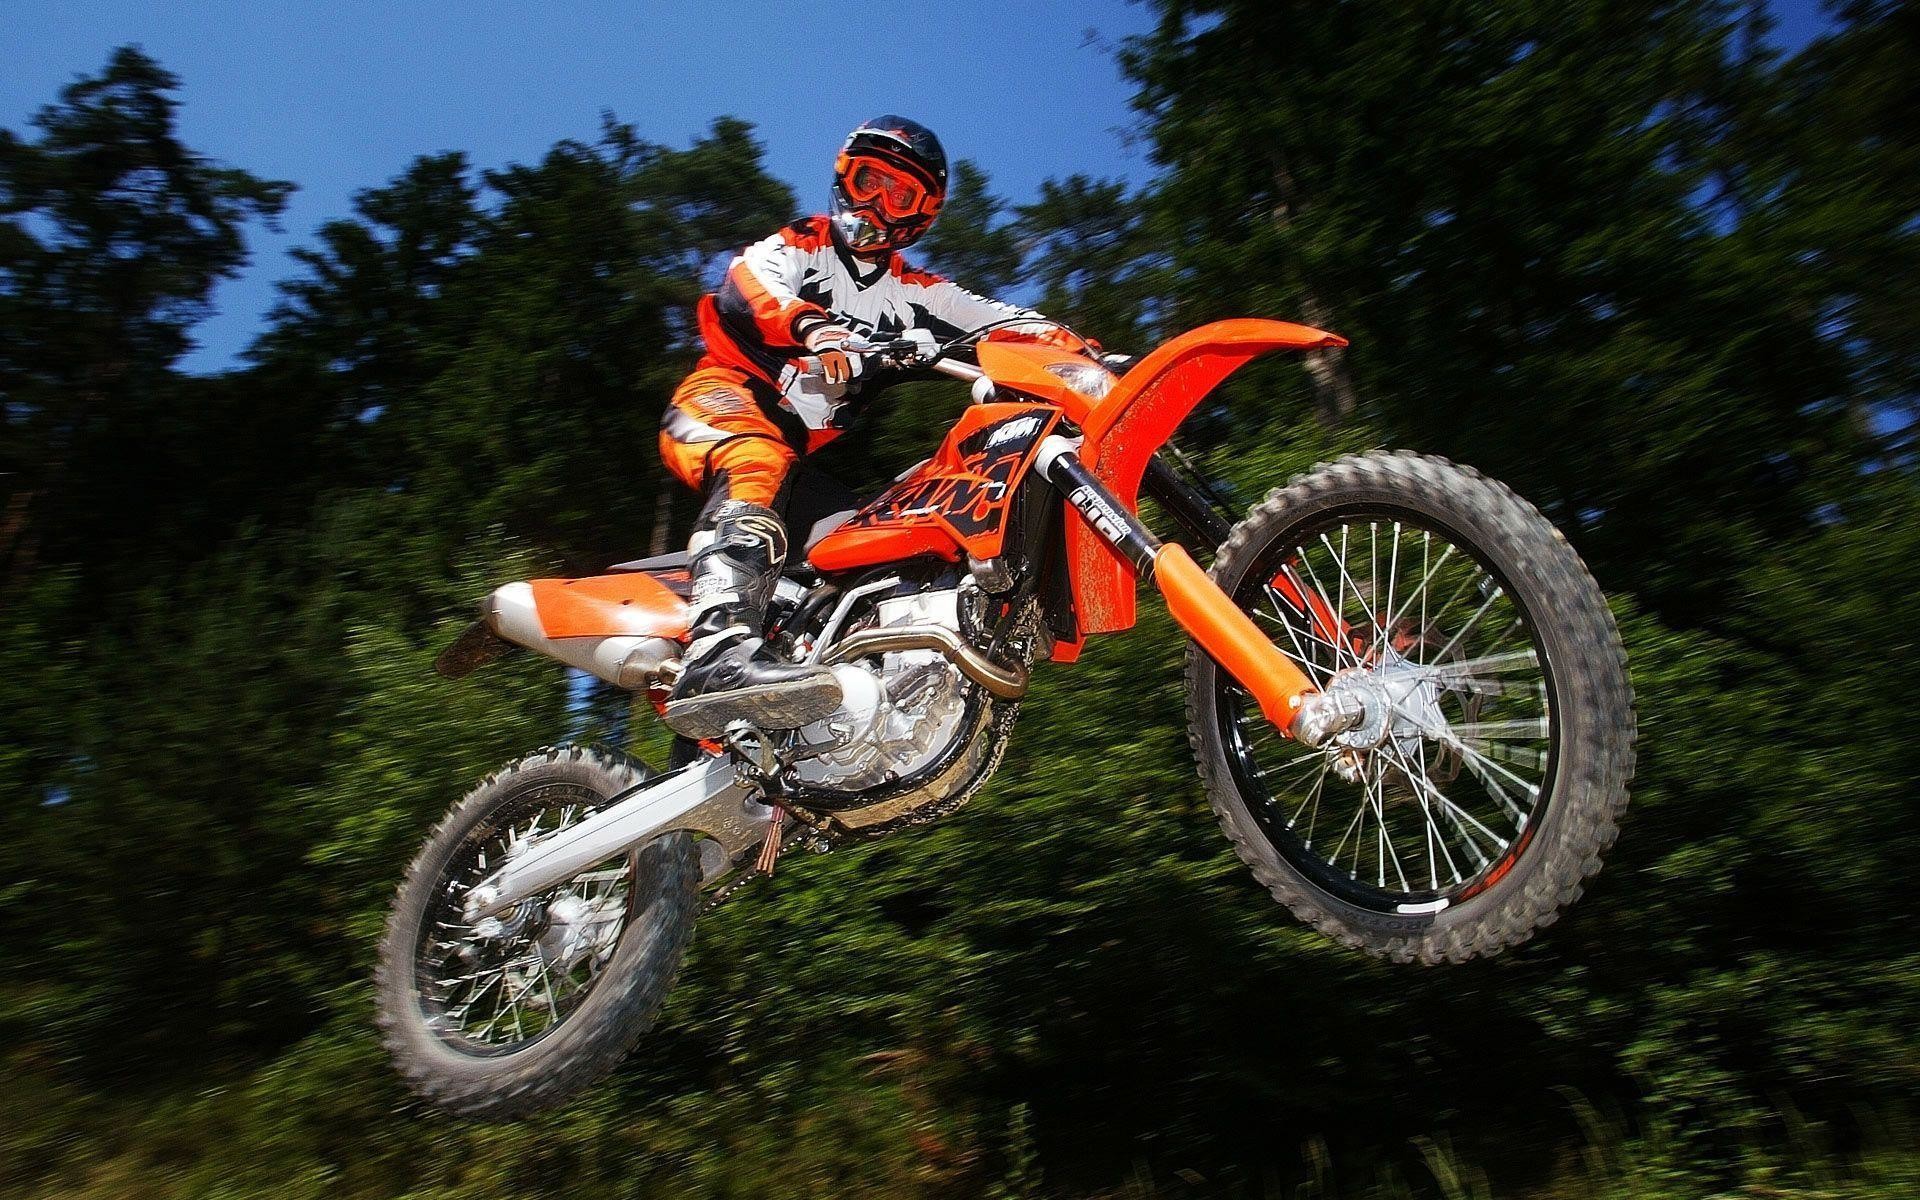 1920x1200 Ktm Wallpapers - Full HD wallpaper search - page 2